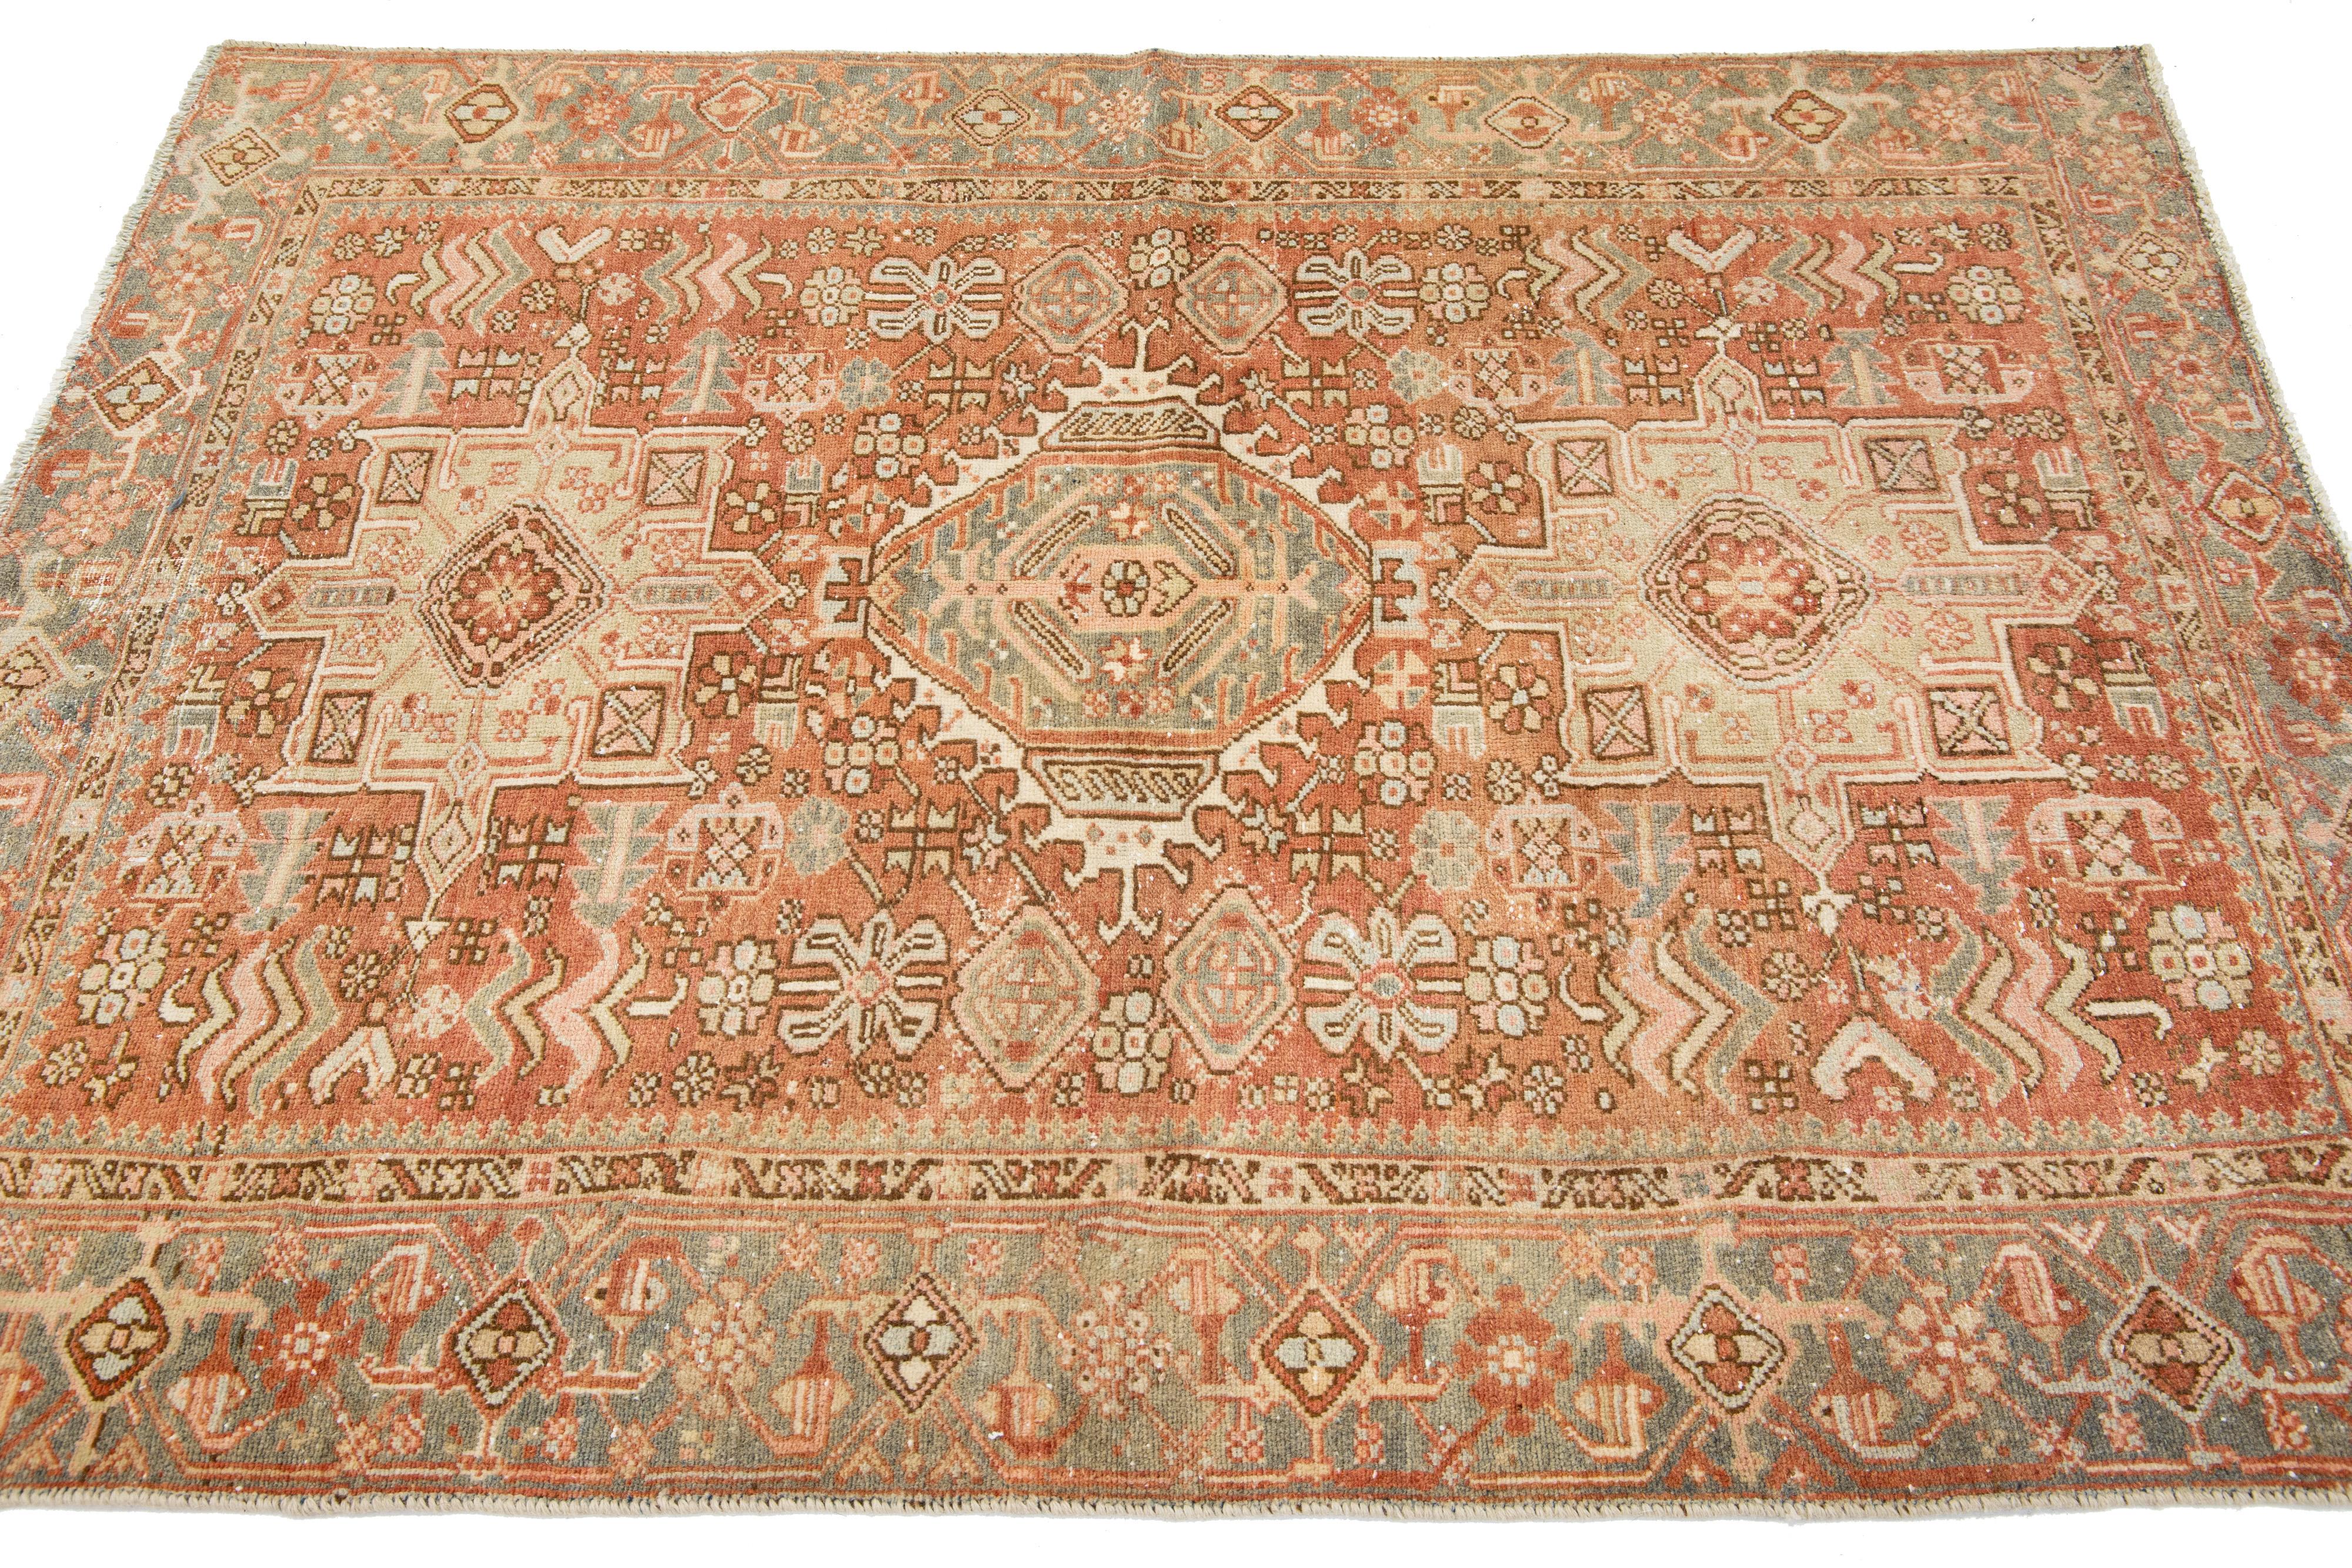 Hand-Knotted Persian Heriz Antique Wool Rug In Rust Color Featuring a Tribal Pattern For Sale